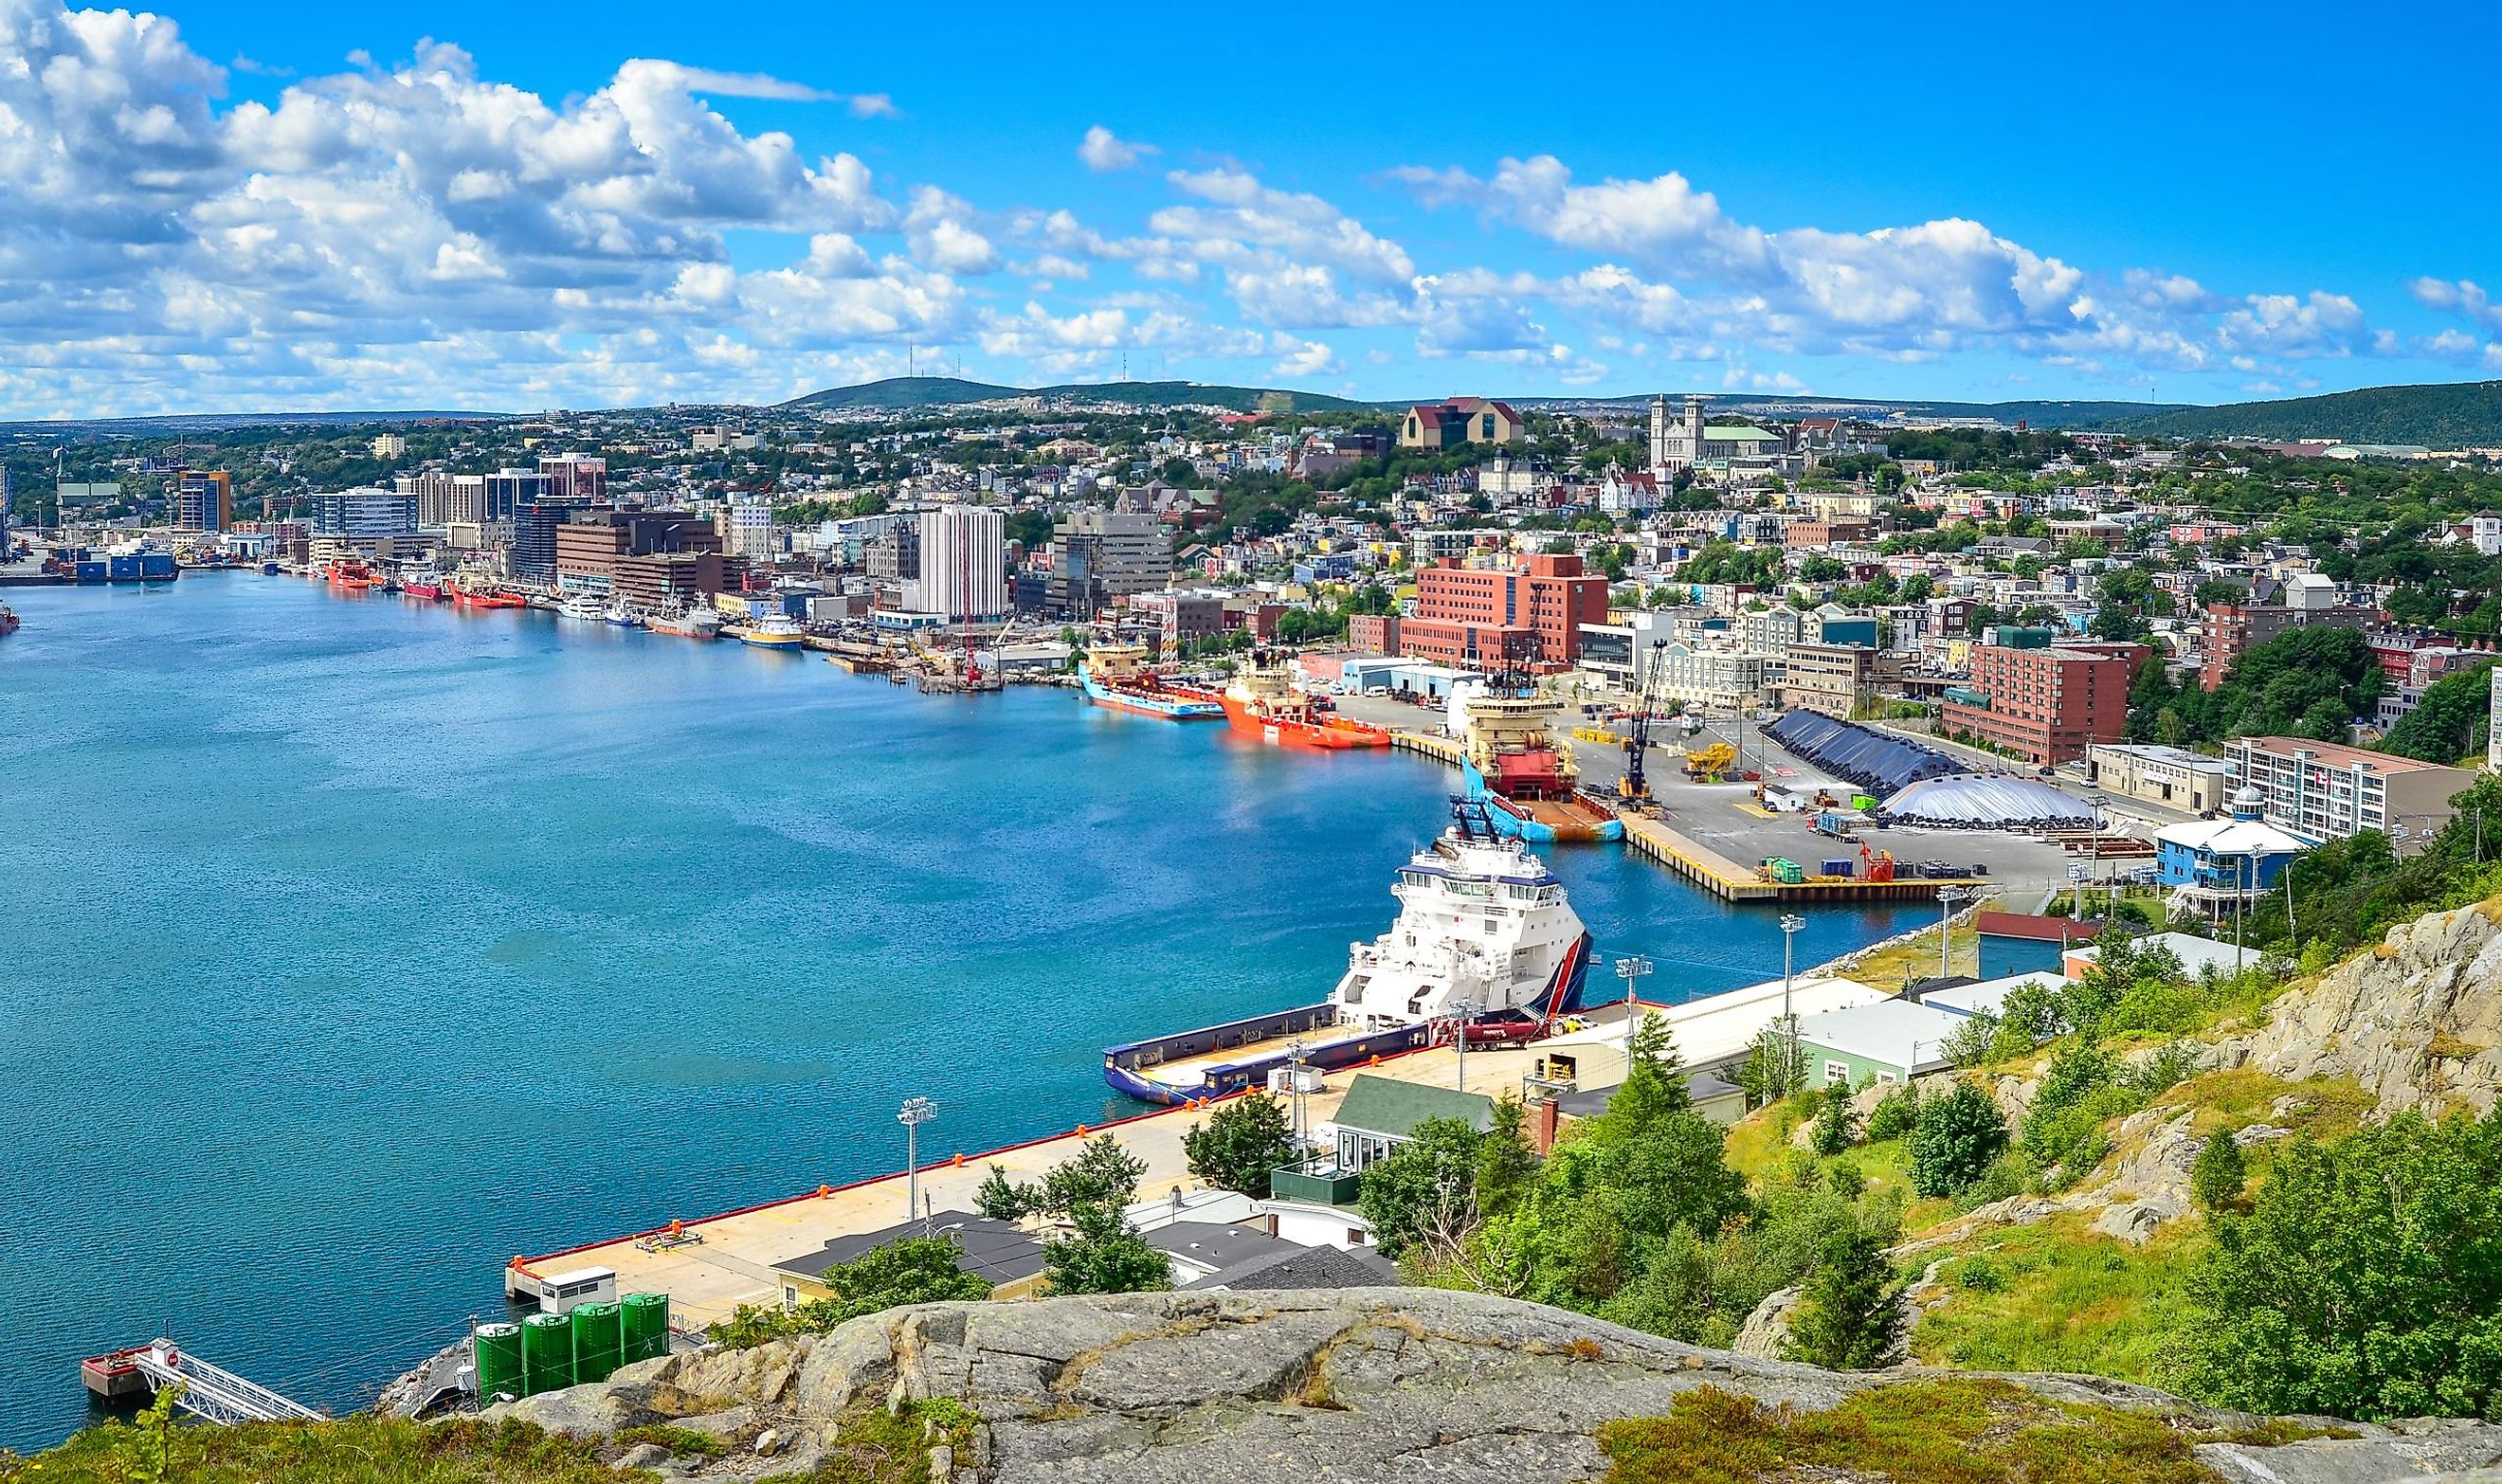 Panoramic views with bight blue summer day sky with puffy clouds over the harbor and city of St. John's NewFoundland